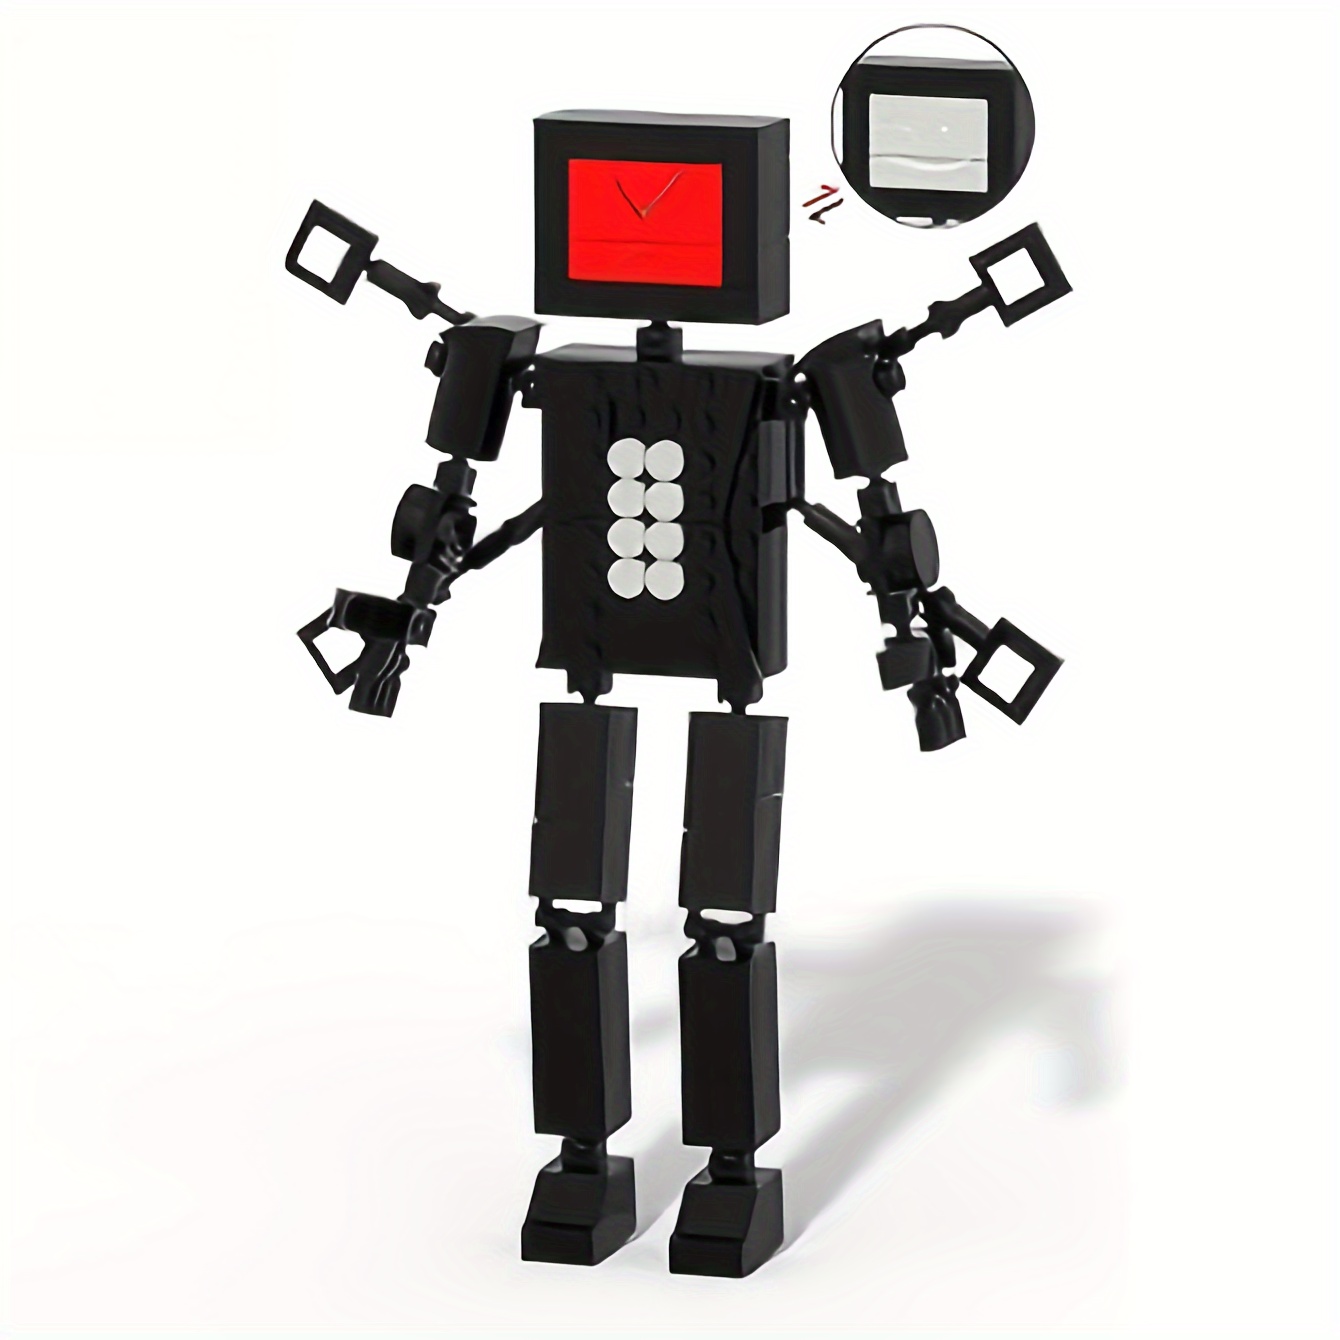 

Tv Man Building Block Set, Man Toy Building Block Characters, Game Movie Character Models, Gifts For Game Fans